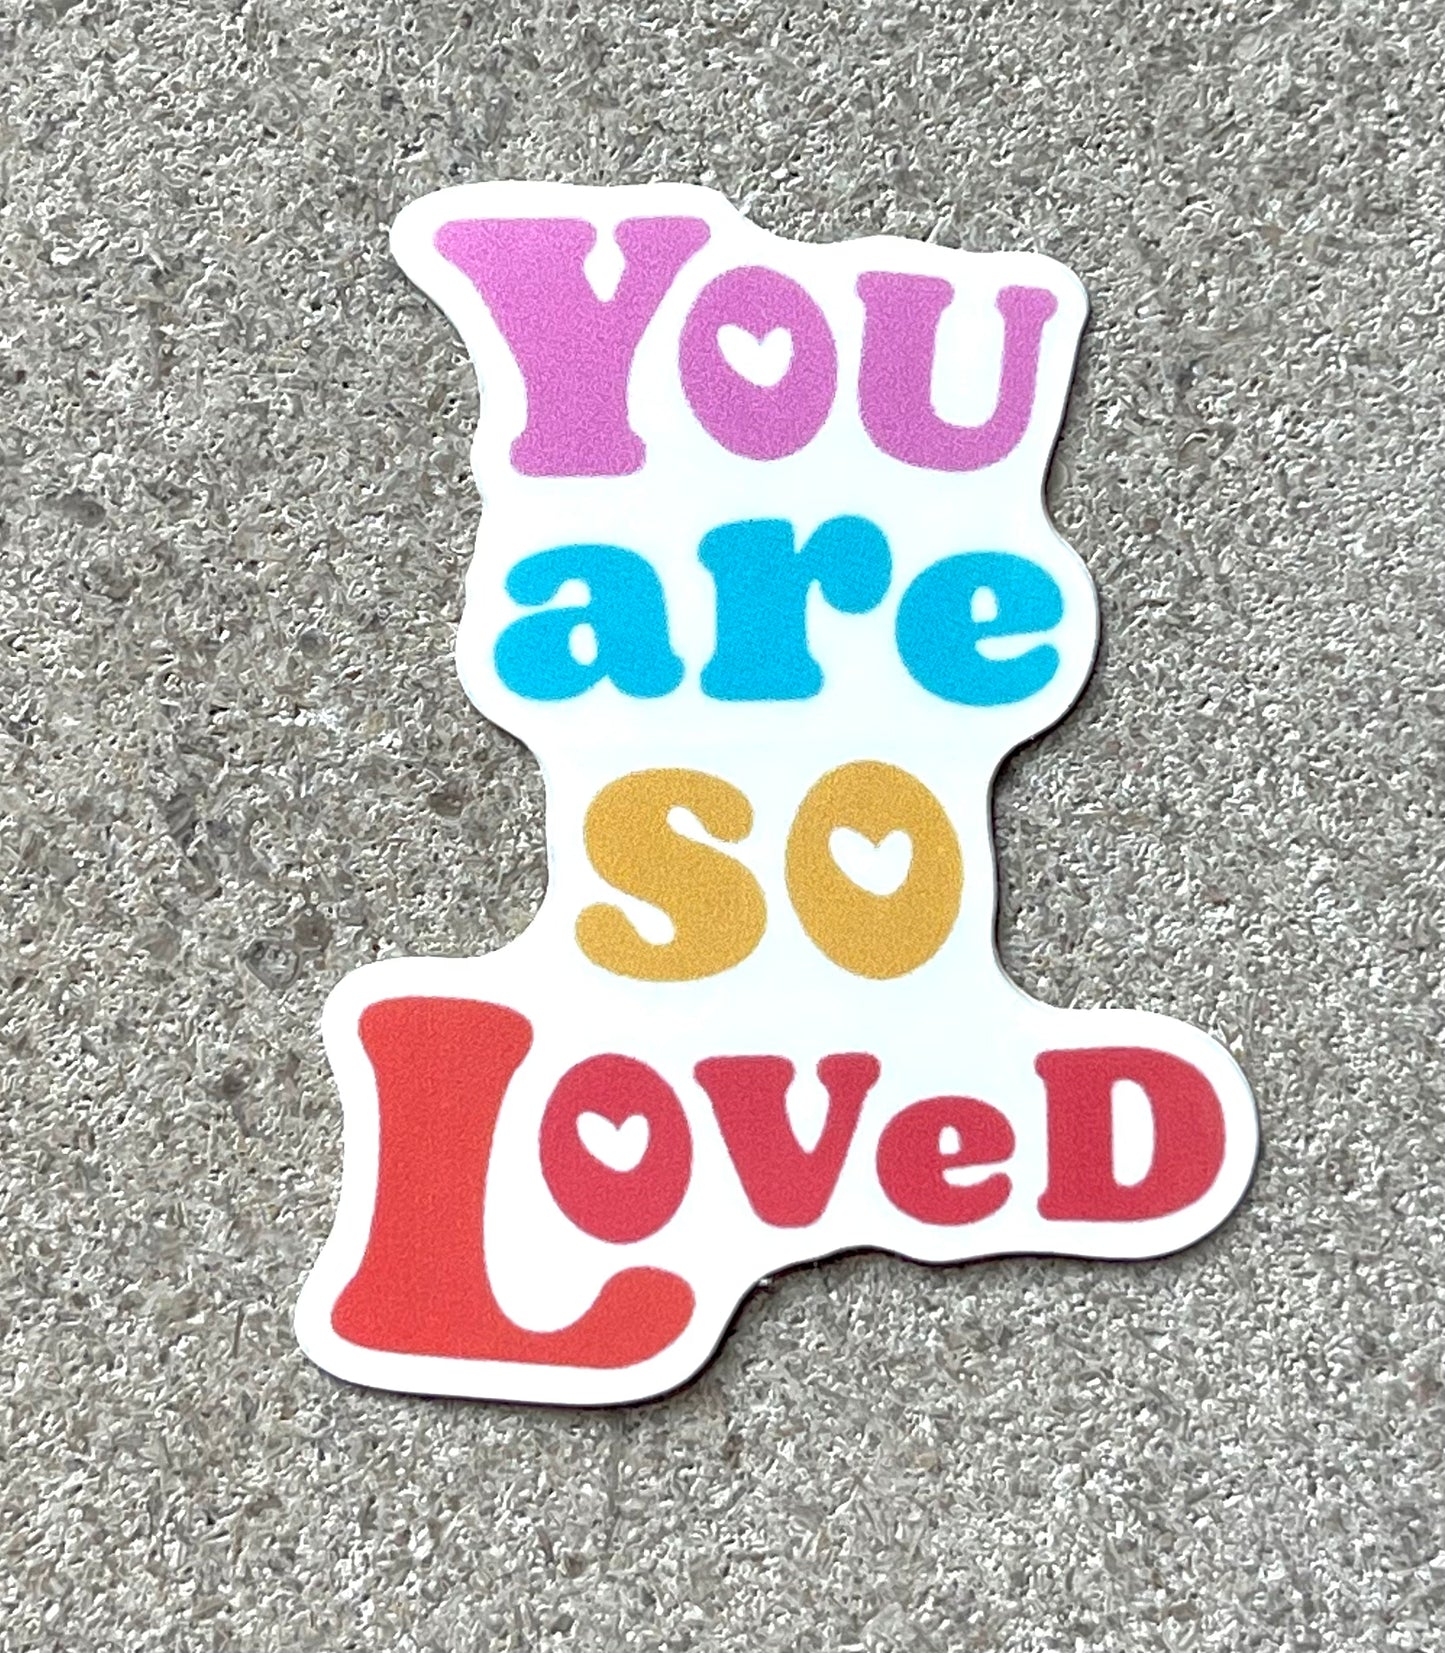 "You are so loved" sticker